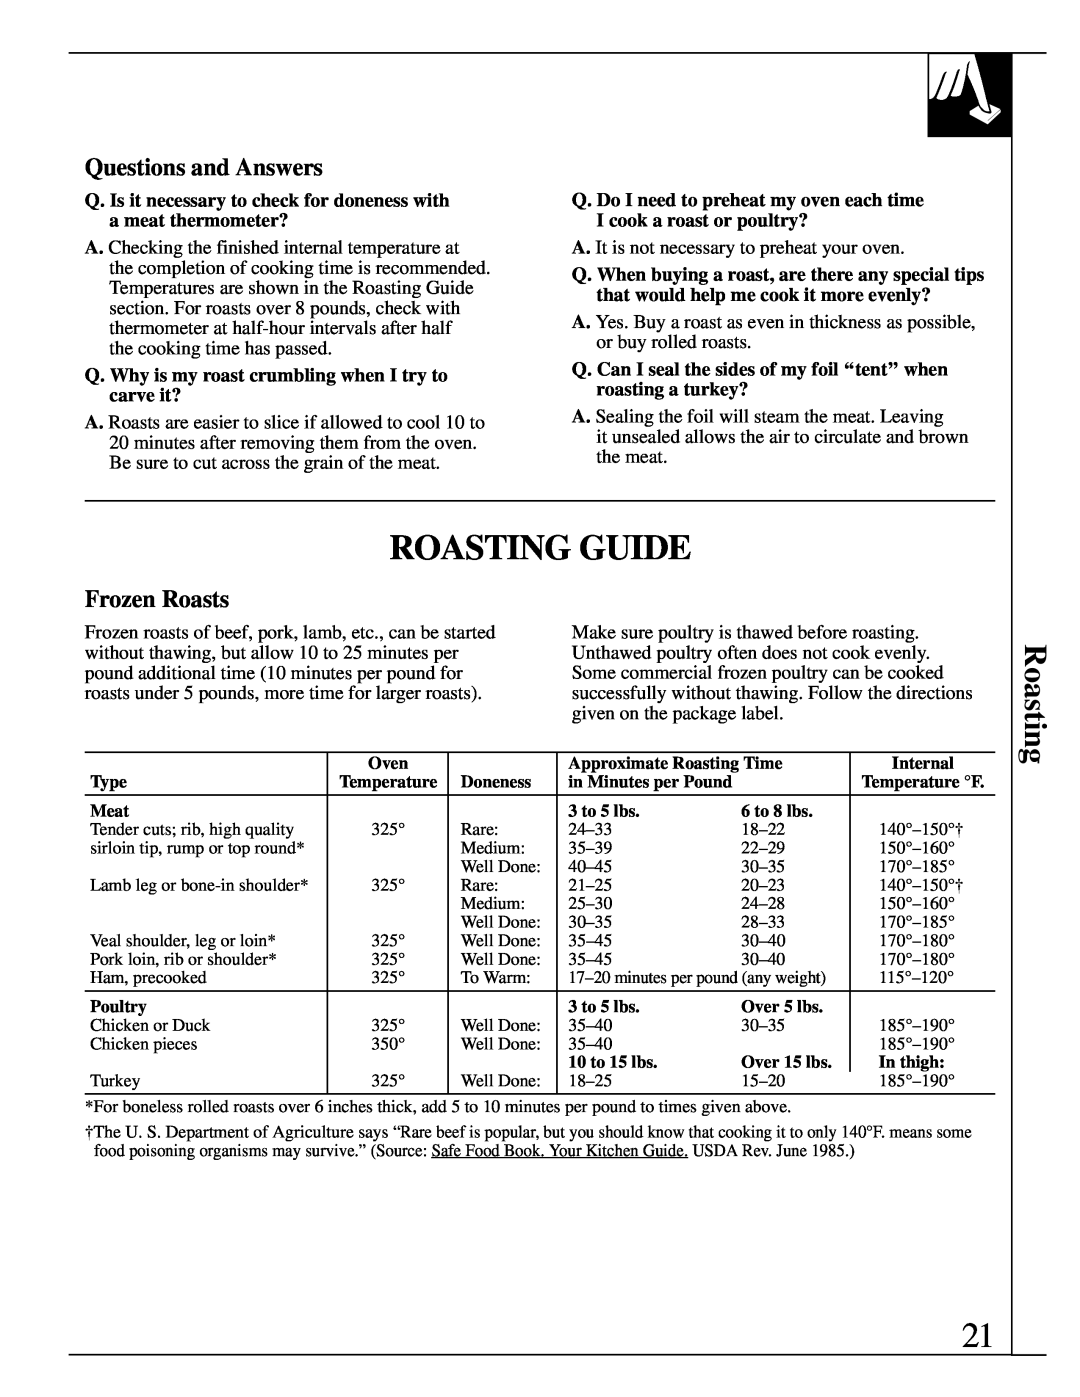 GE JSP26, JSP34 Roasting Guide, Questions and Answers, Frozen Roasts, Q. Why is my roast crumbling when I try to carve it? 